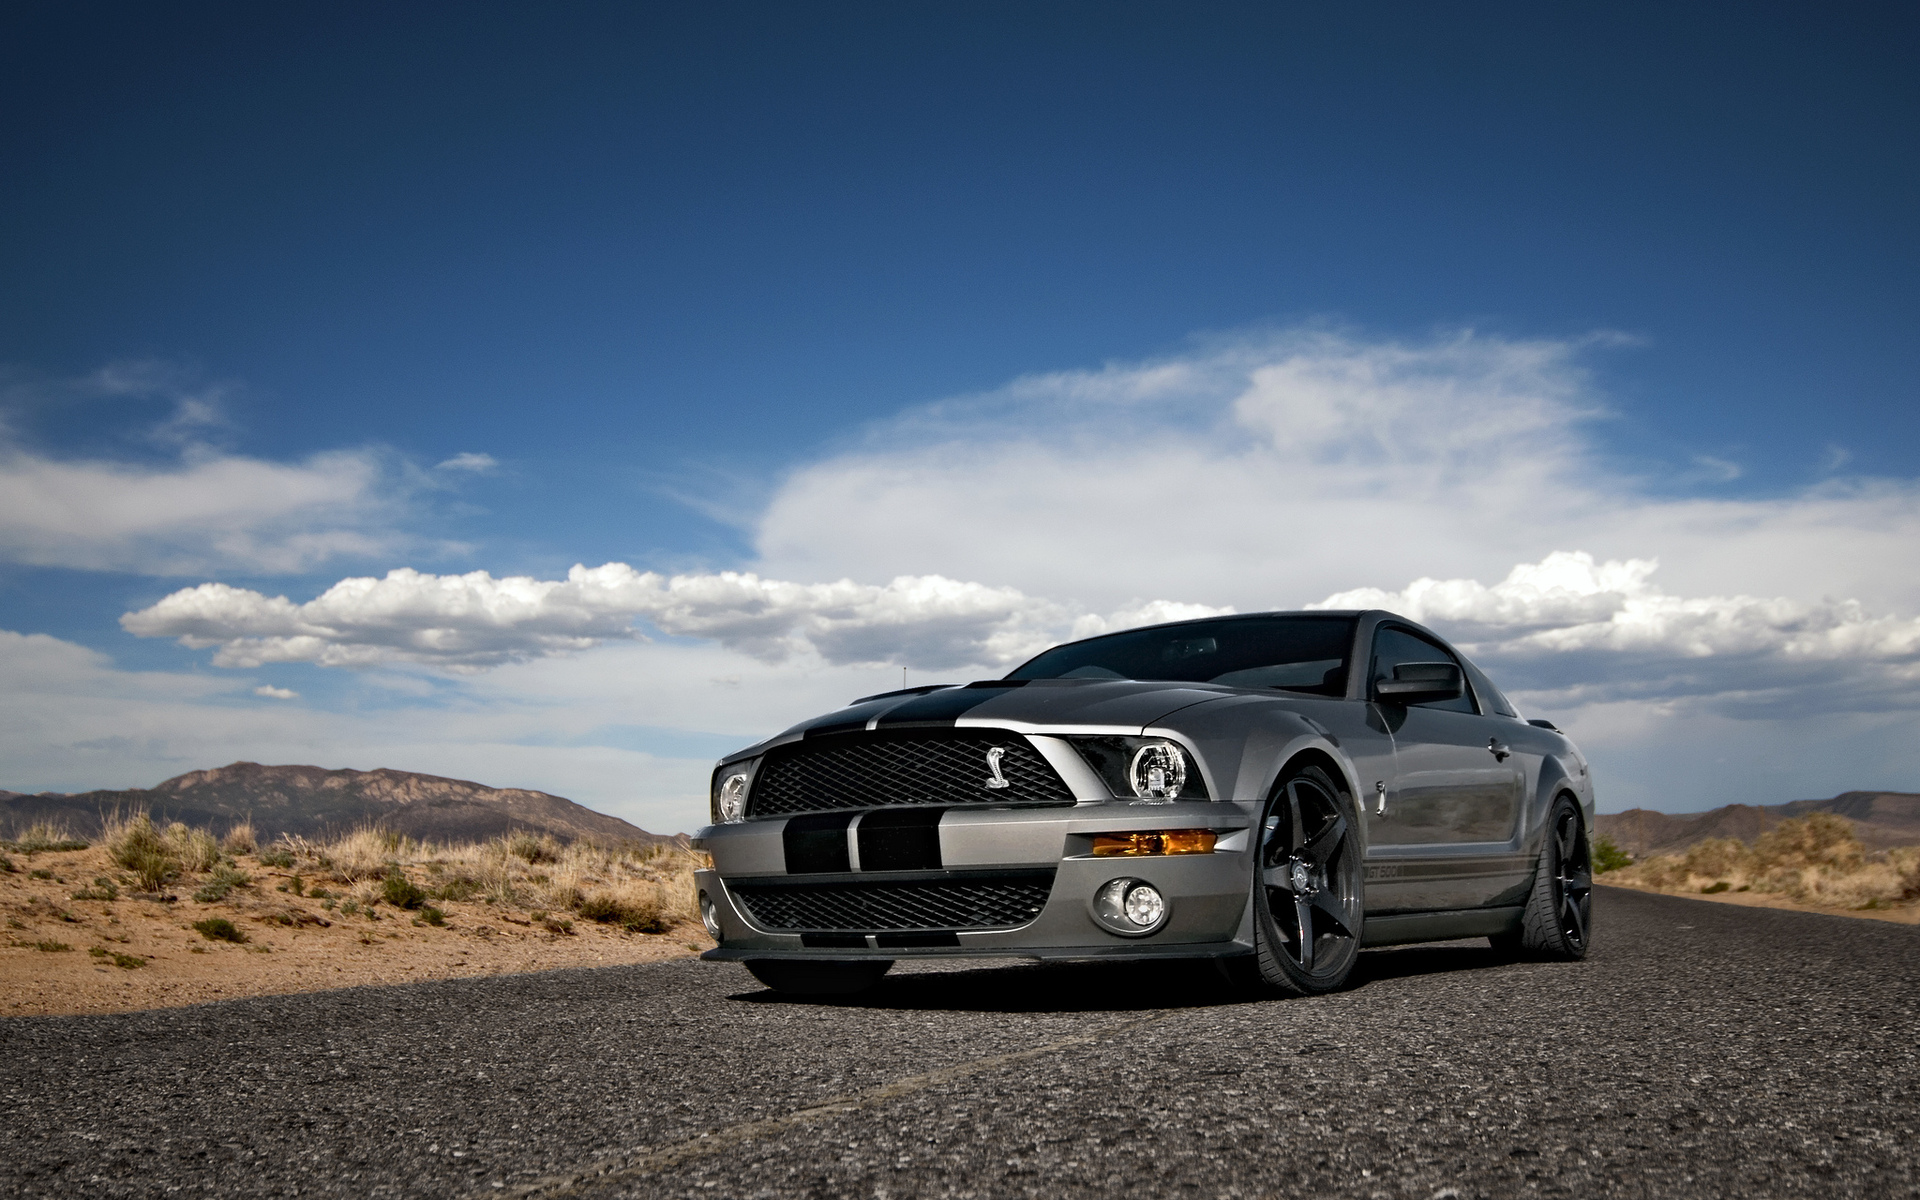 Ford Mustang Shelby gt500 Wallpaper HD